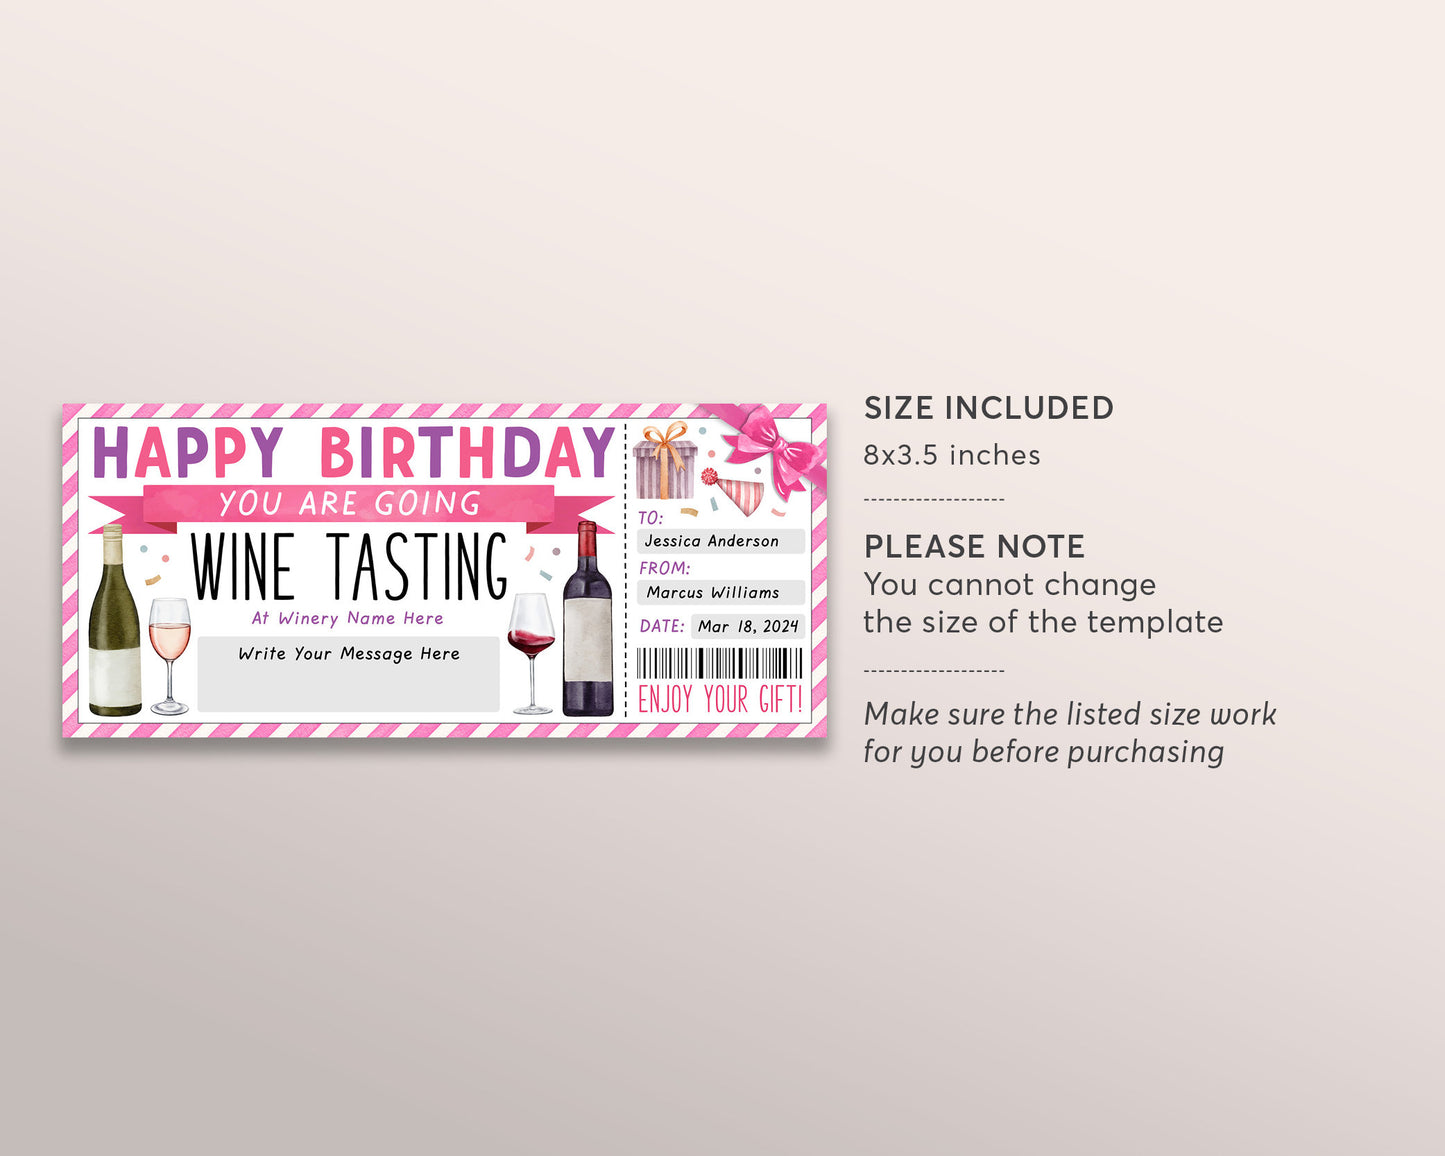 Wine Tasting Gift Voucher Editable Template, Birthday Surprise Wine Tasting Ticket Gift Certificate For Her, Winery Vineyard Coupon Reveal